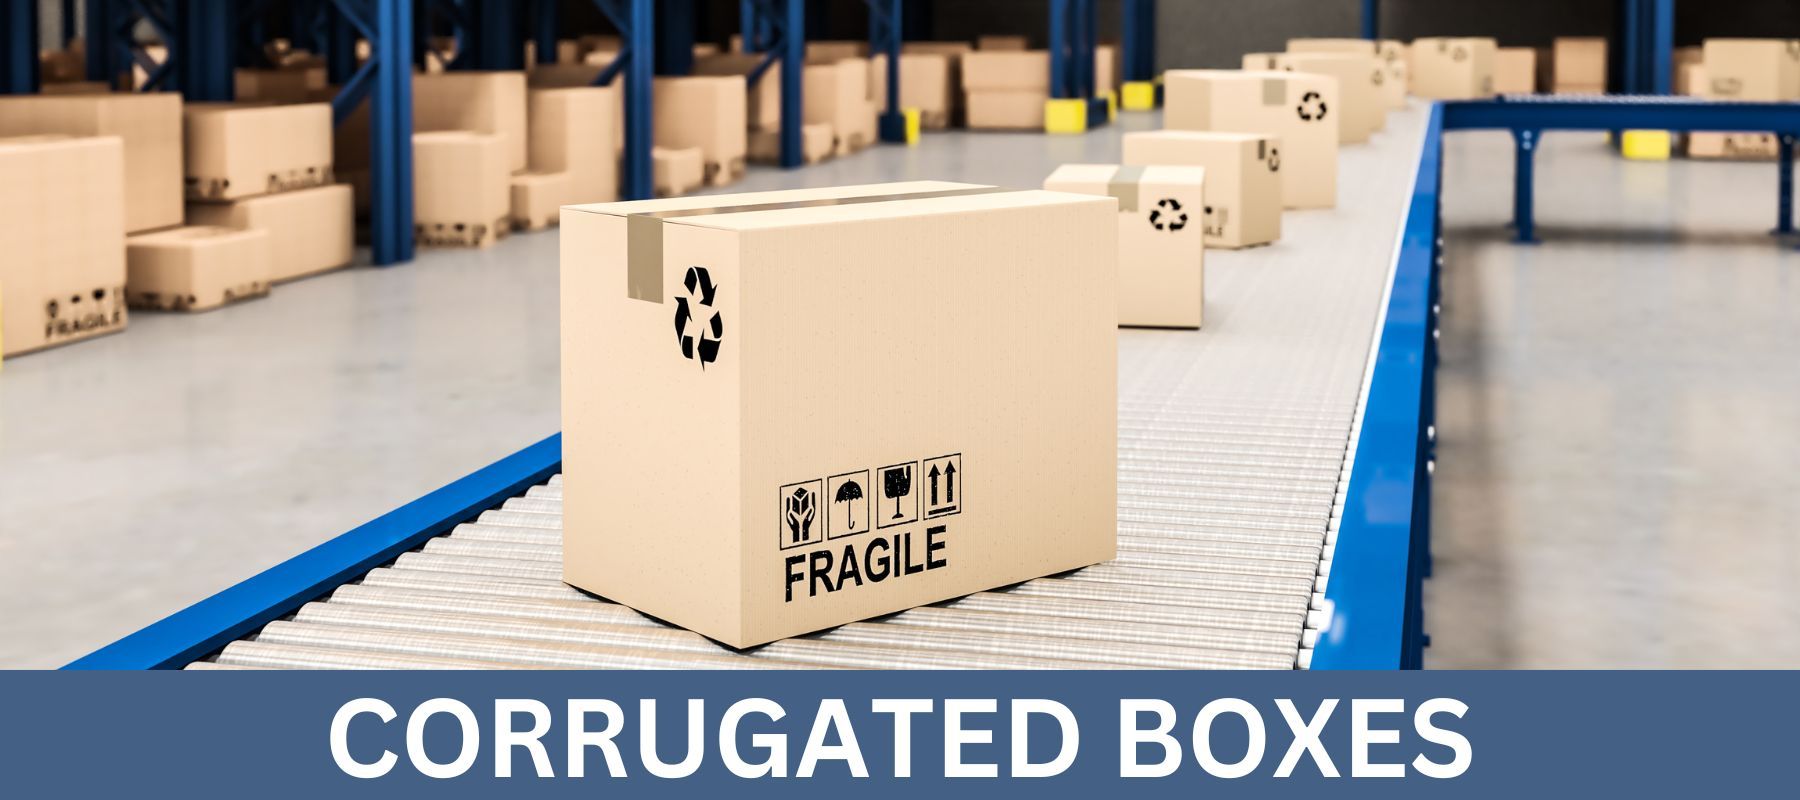 Corrugated Boxes Website 02